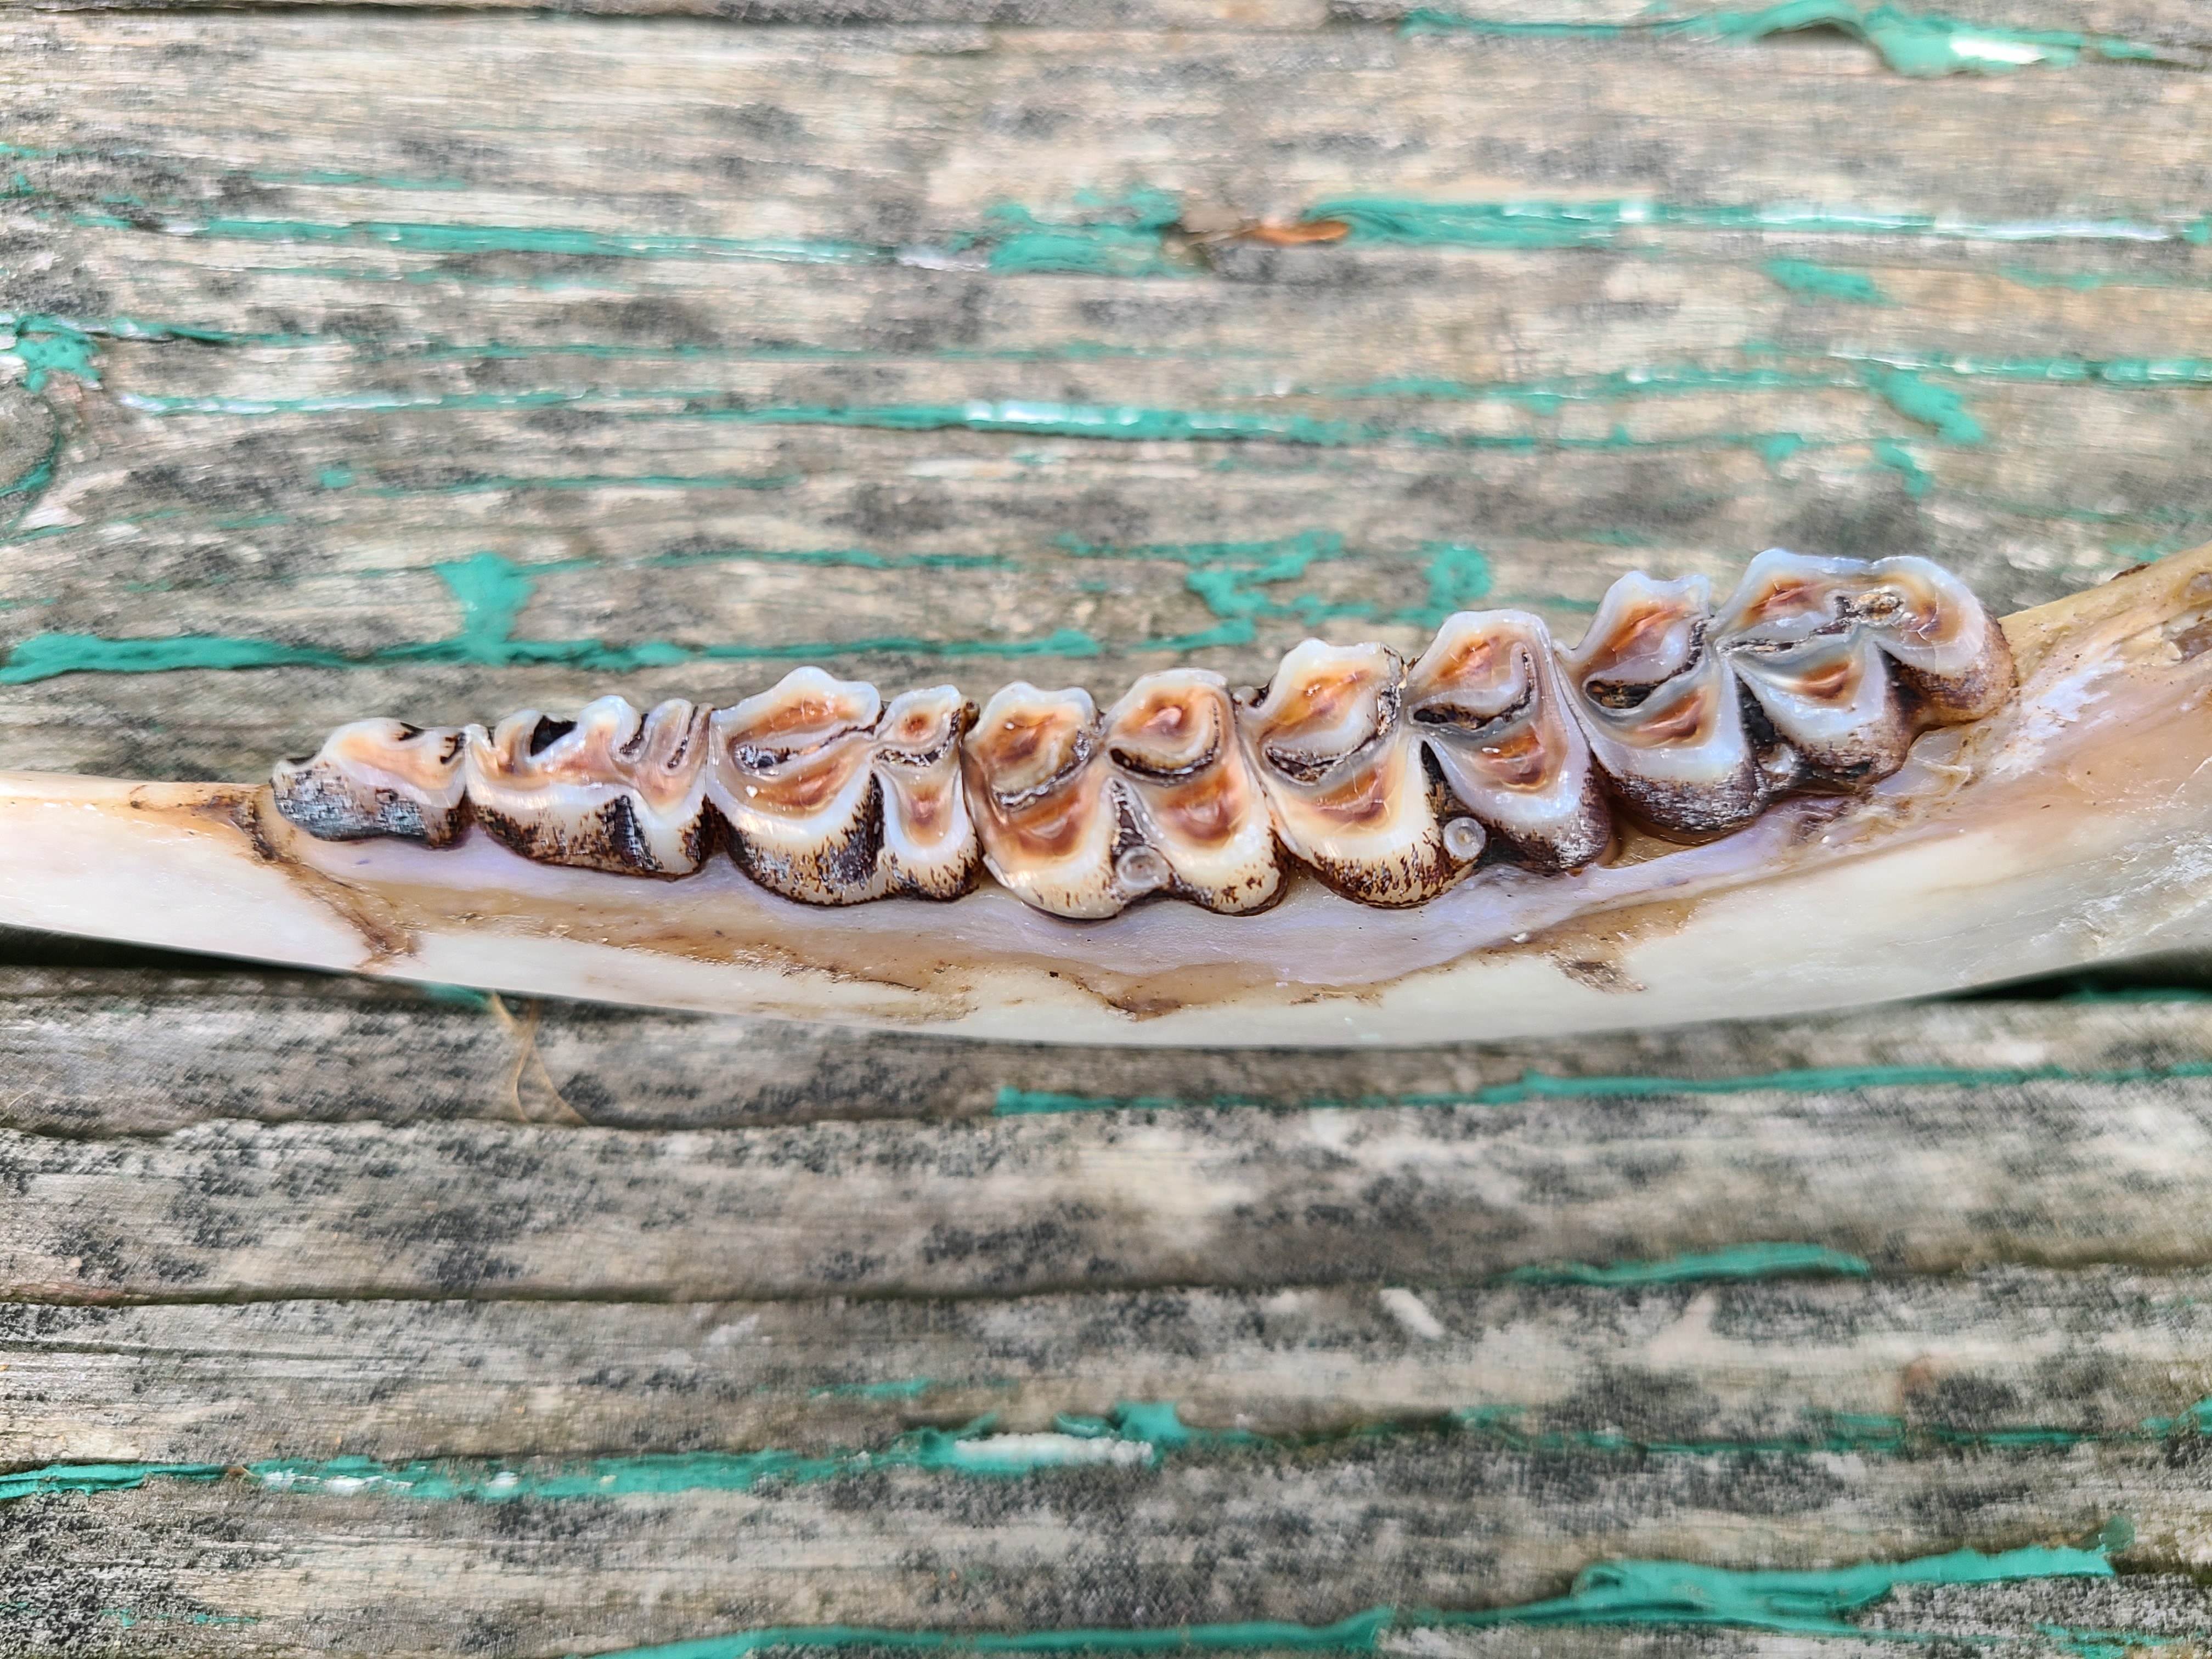 Skinned lower deer jaw top view showing much wear